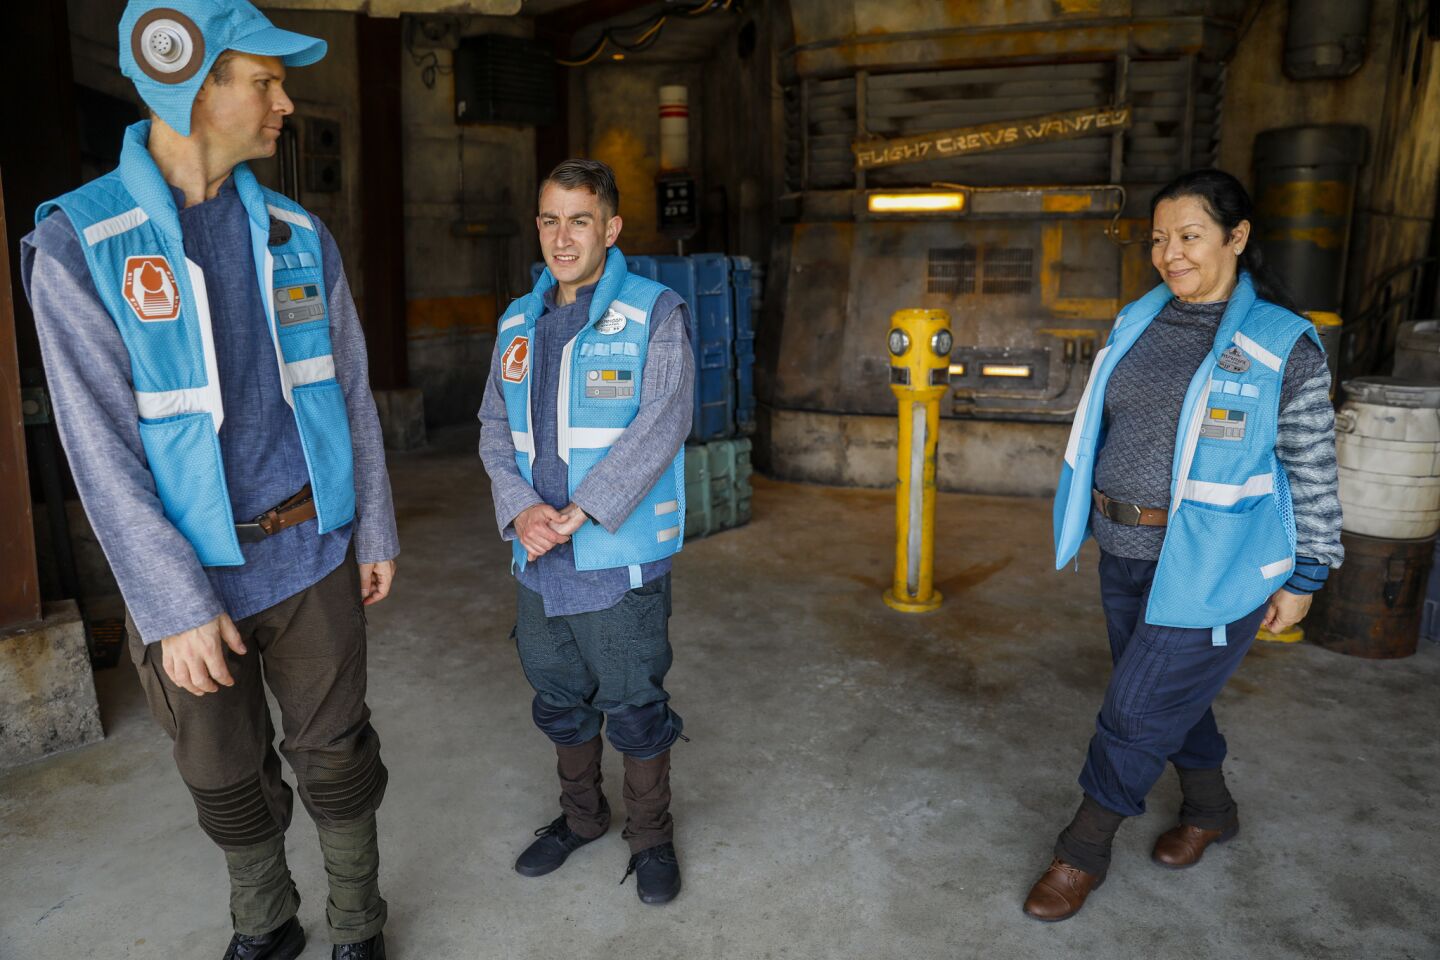 Cast members greet people at the start of The Millennium Falcon: Smugglers Run ride, inside Star Wars: Galaxy's Edge.